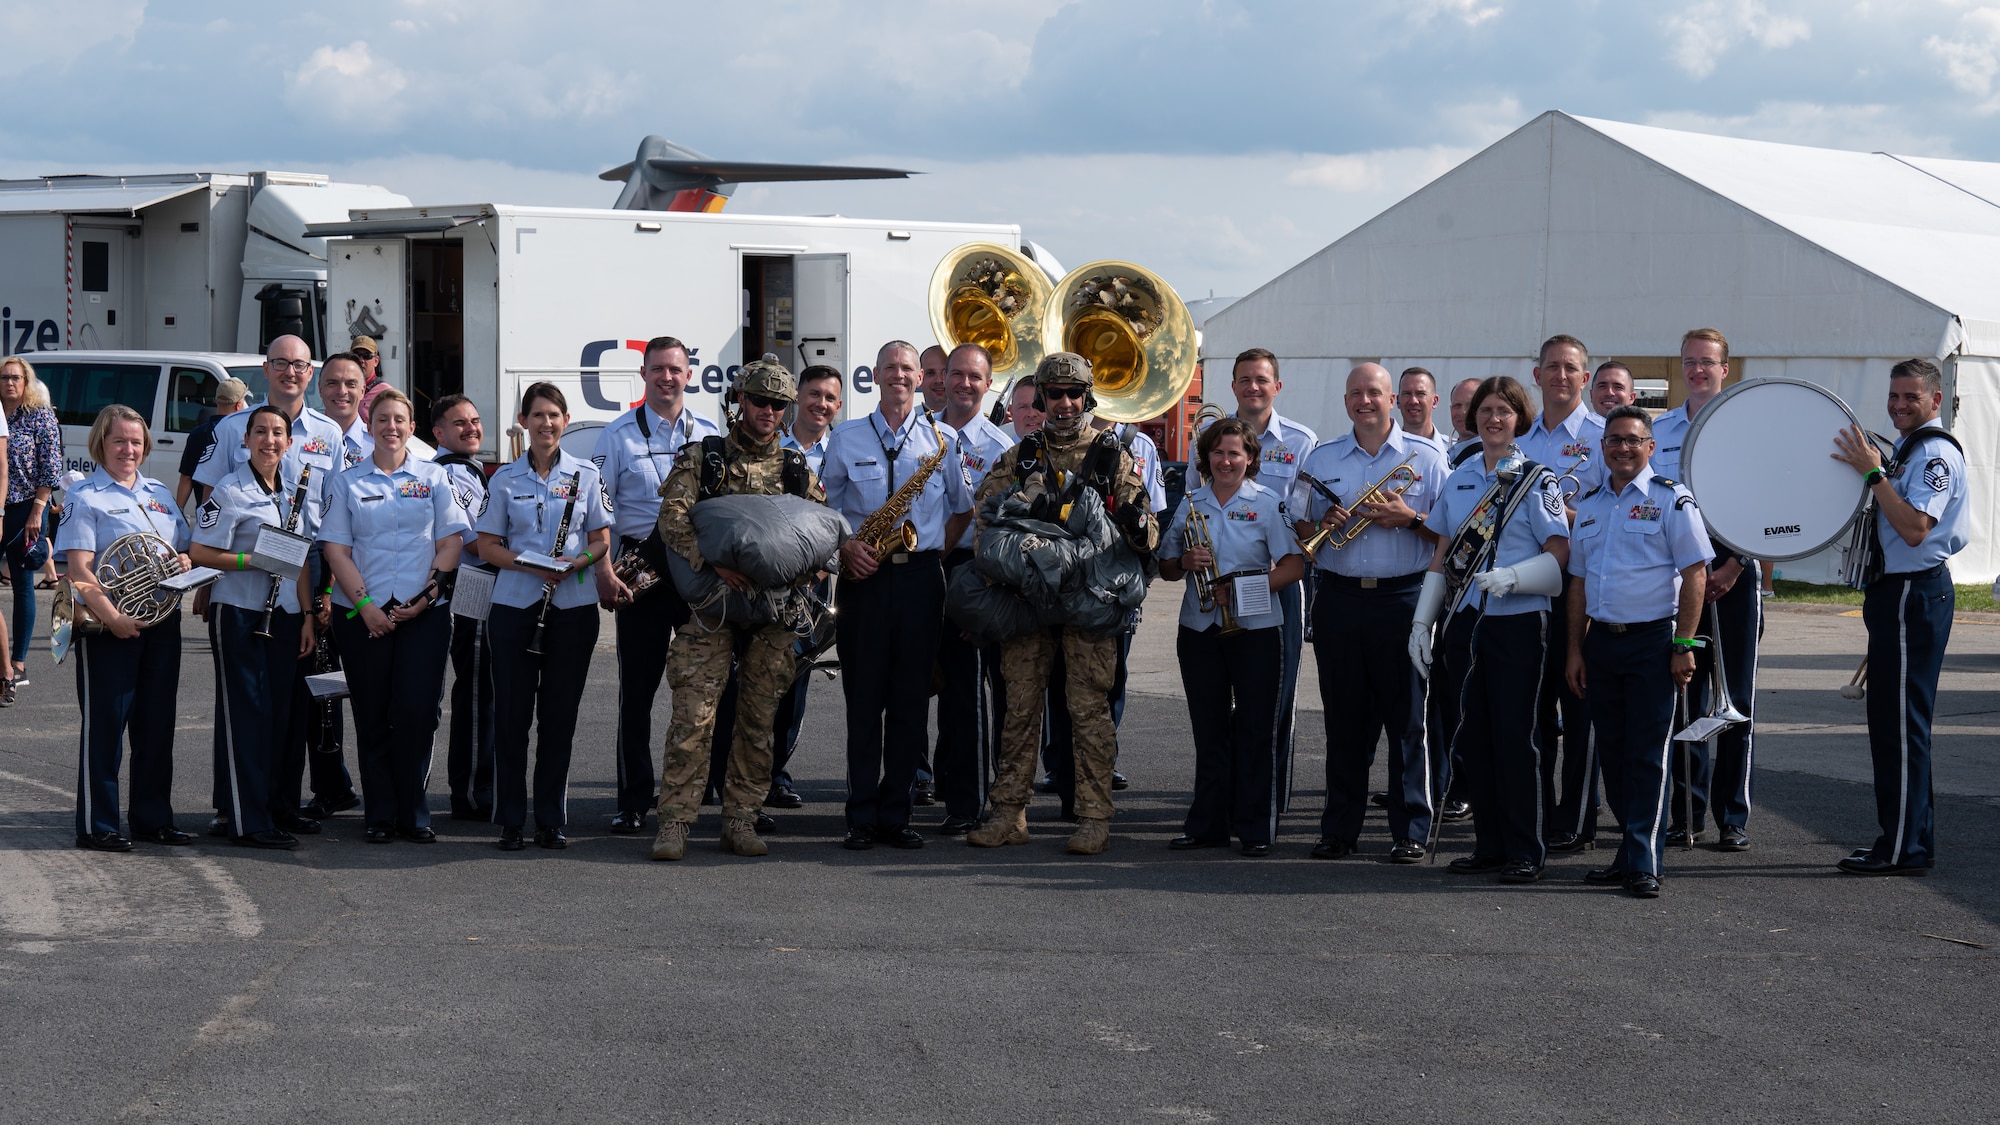 U.S. Air Force Airmen assigned to the U.S. Air Forces in Europe Ceremonial Band, and Polish military special forces parachutists, pose for a group photo during the NATO Days event at Leoš Janáček Airport in Ostrava, Czech Republic, Sept. 17, 2023.